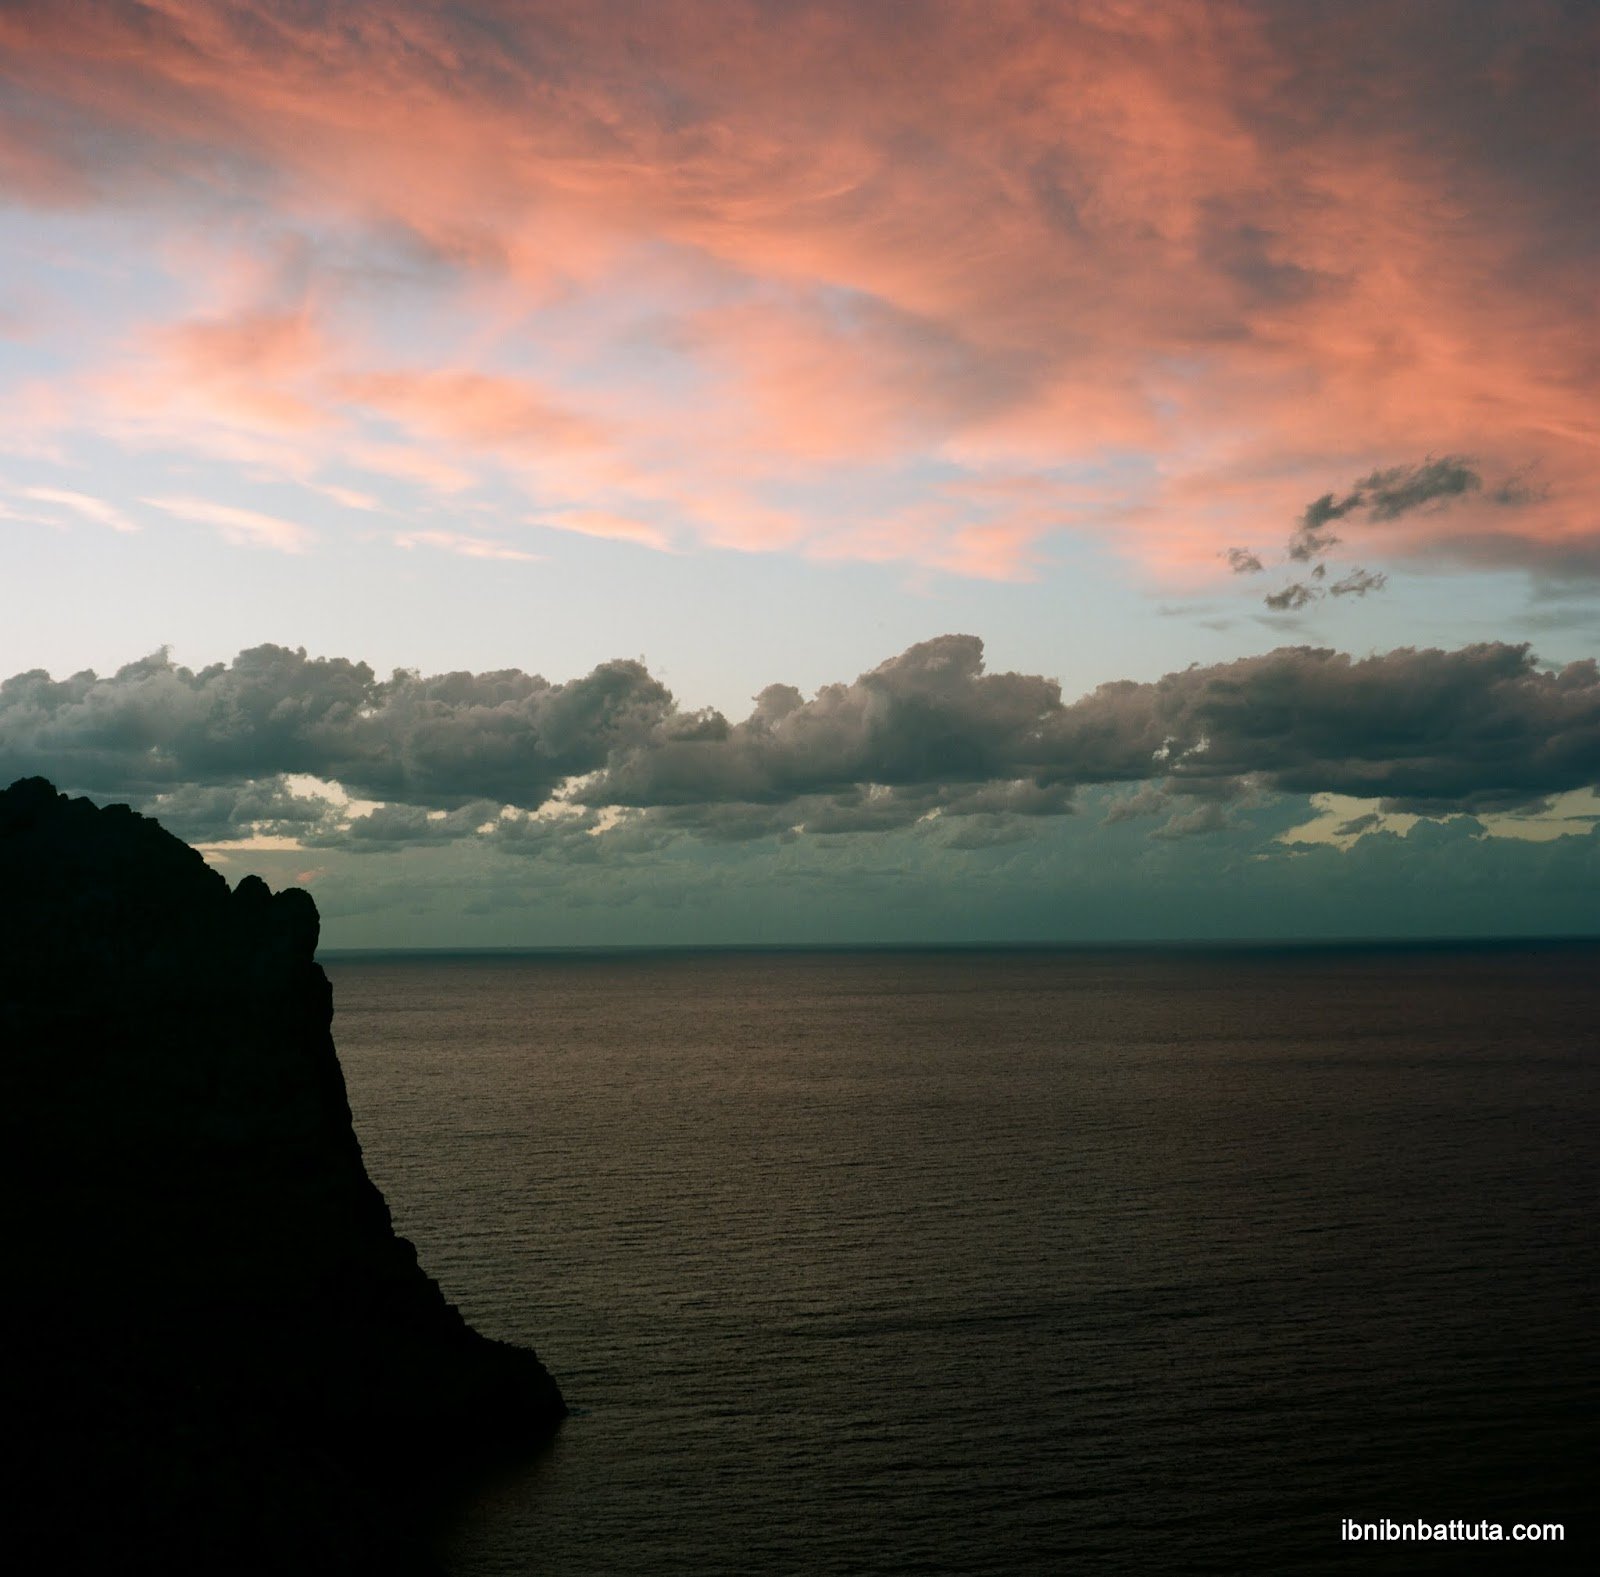  Mallorca's cliffs offer dramatic, unobstructed sunset views. 